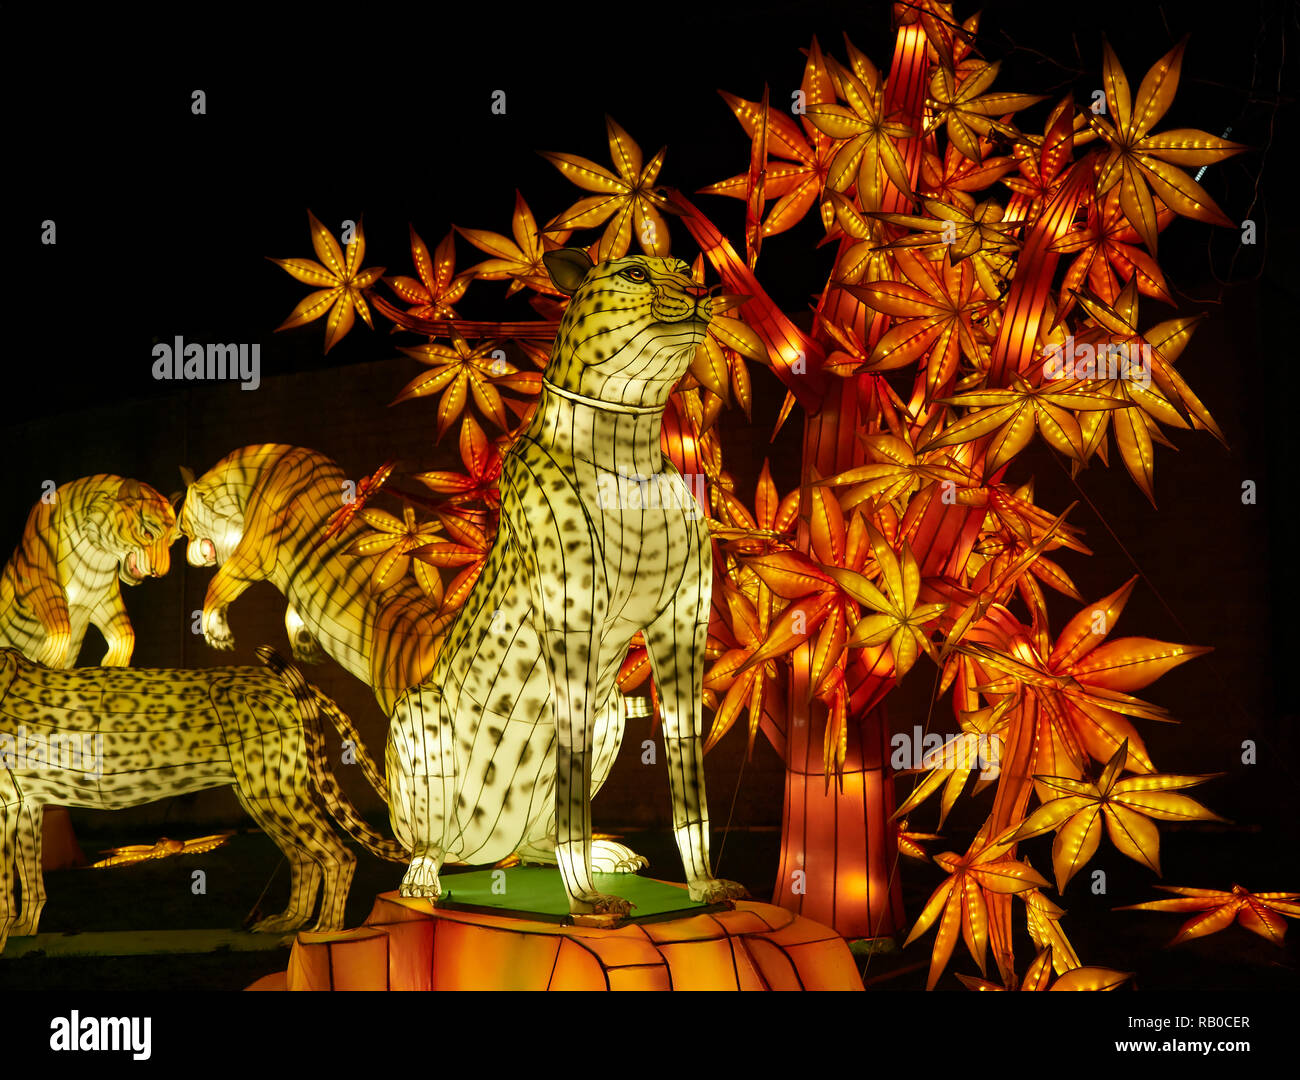 Edinburgh Zoo, Edinburgh, Scotland, UK, 5th January 2019, Giant Lanterns of China Display of Mythical Creatures, Legends and Animals throughout the Zoo during January 2019. Leopard. Stock Photo